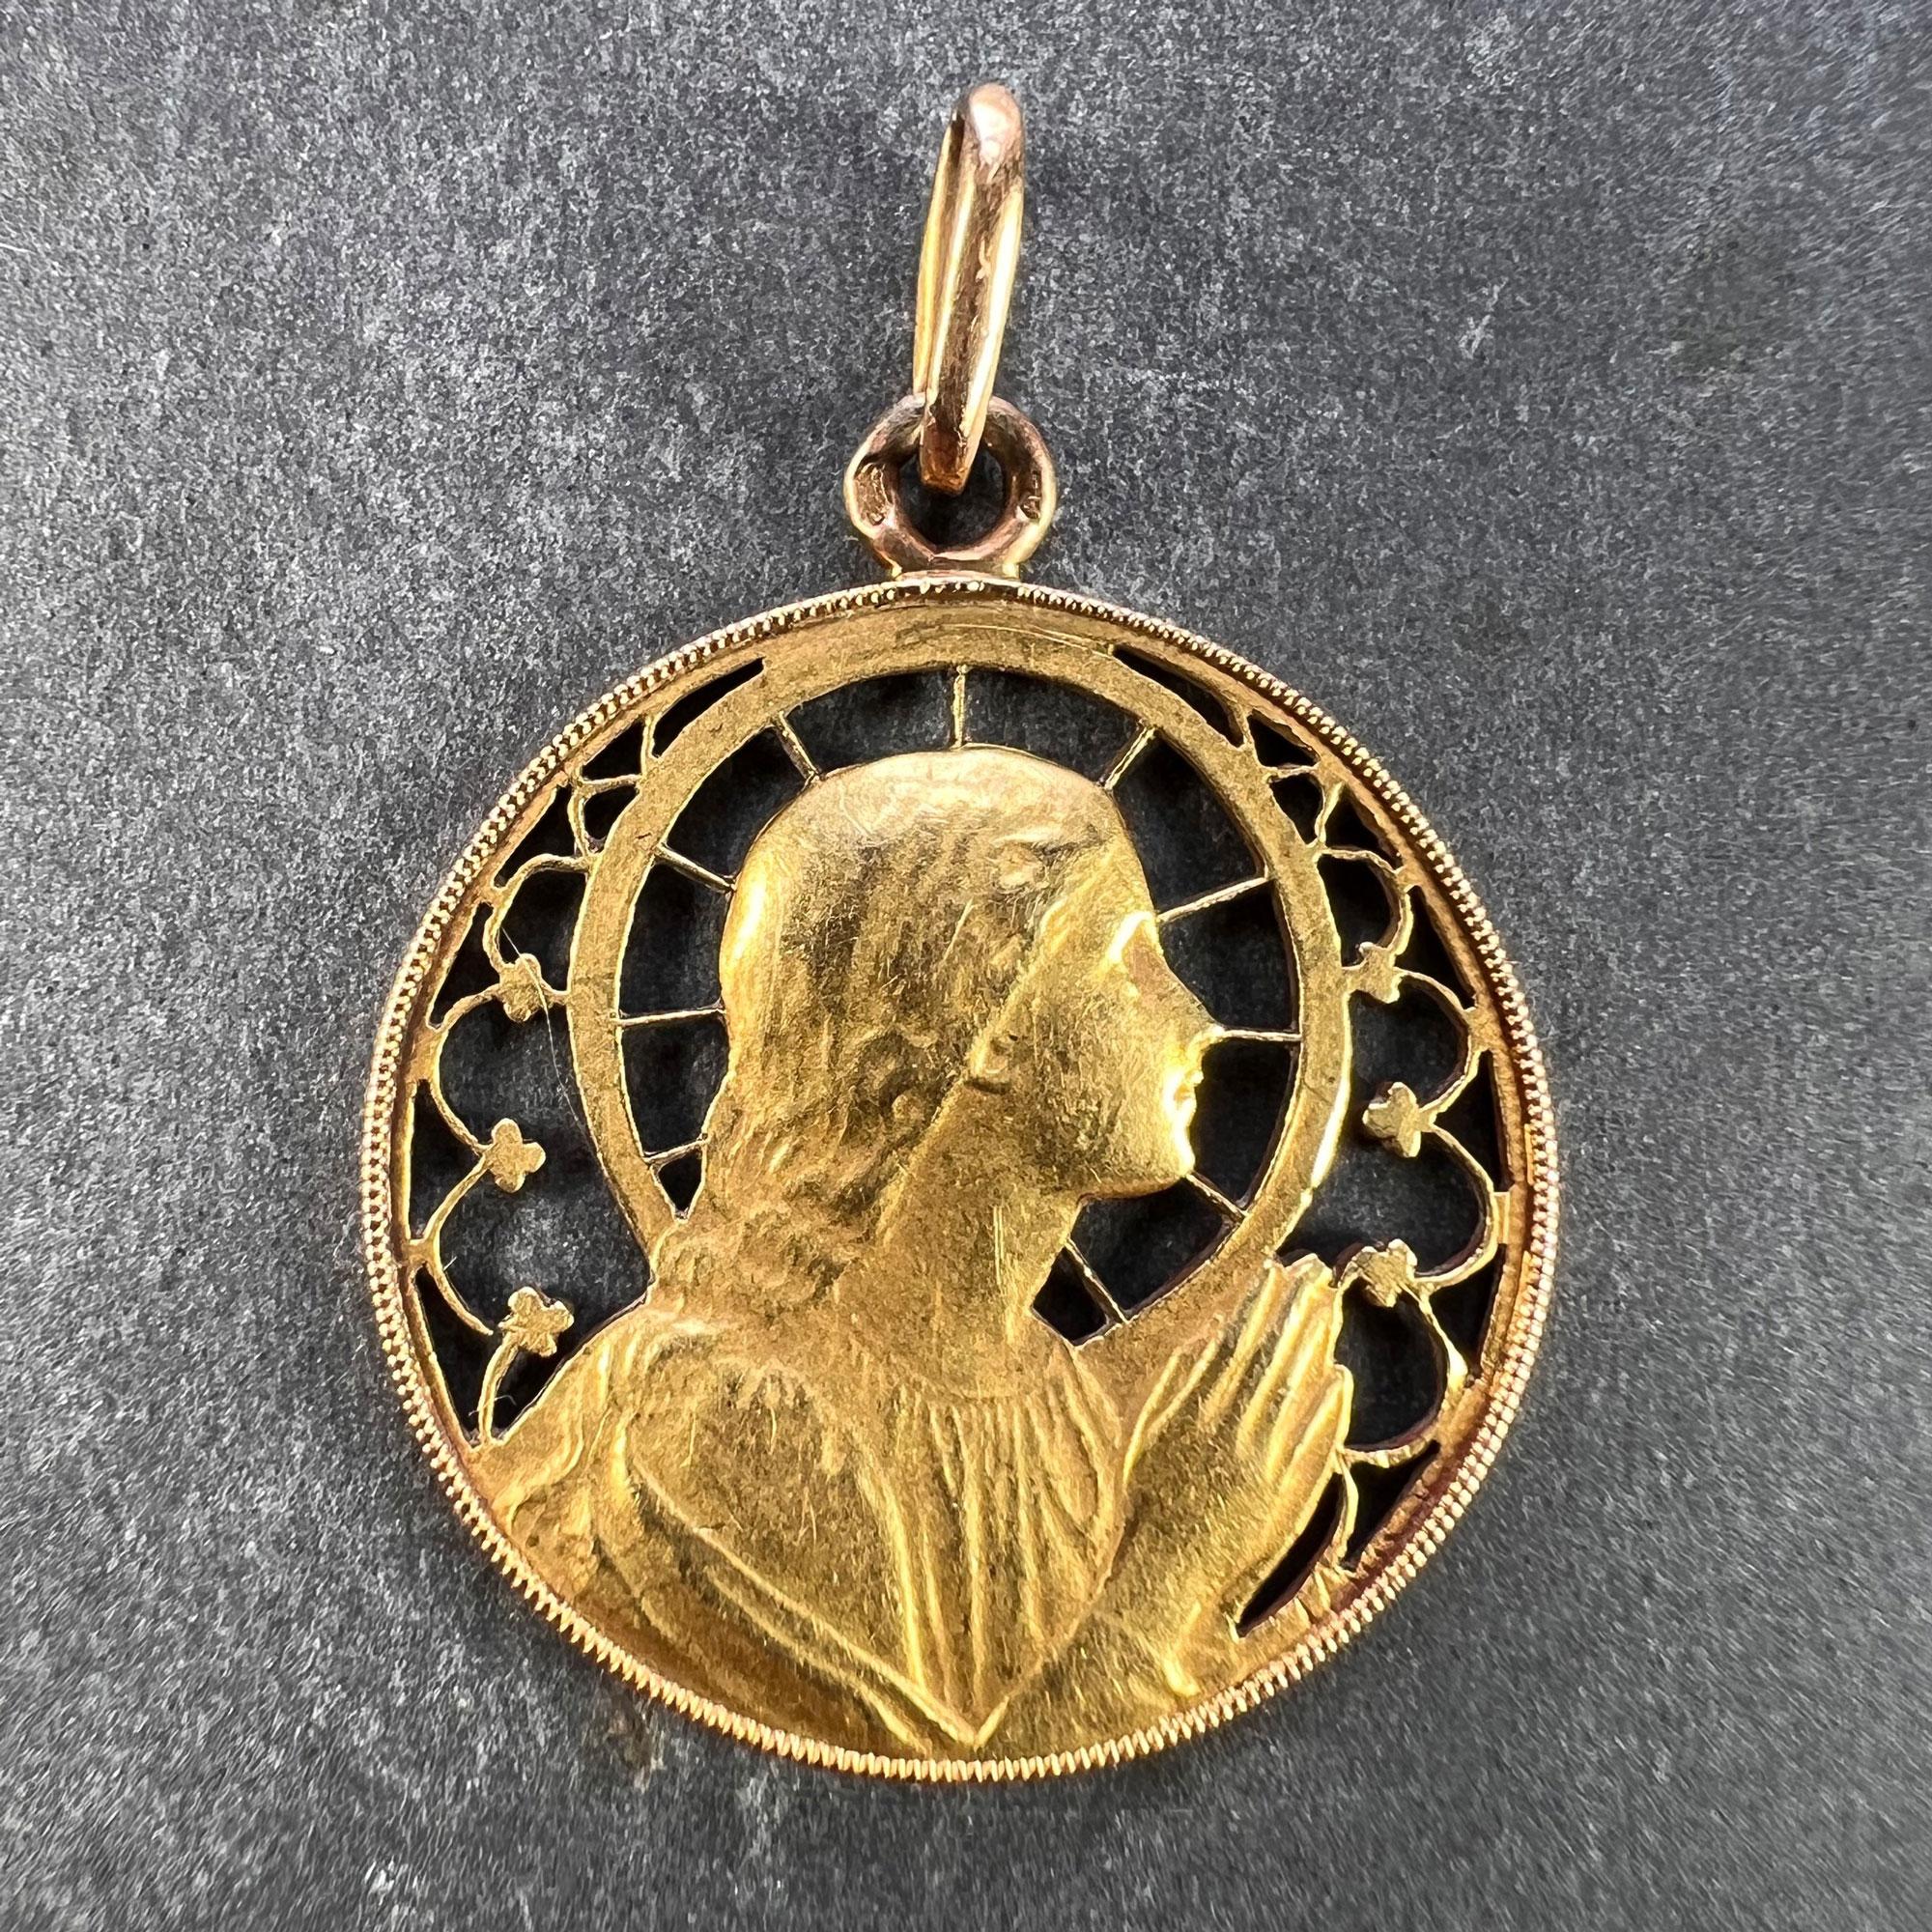 A French 18 karat (18K) yellow gold charm pendant designed as a round medal depicting the Virgin Mary within a pierced frame designed to resemble a halo and stained-glass window. The reverse engraved AMR with the date '24 Oct 47'. Stamped with the